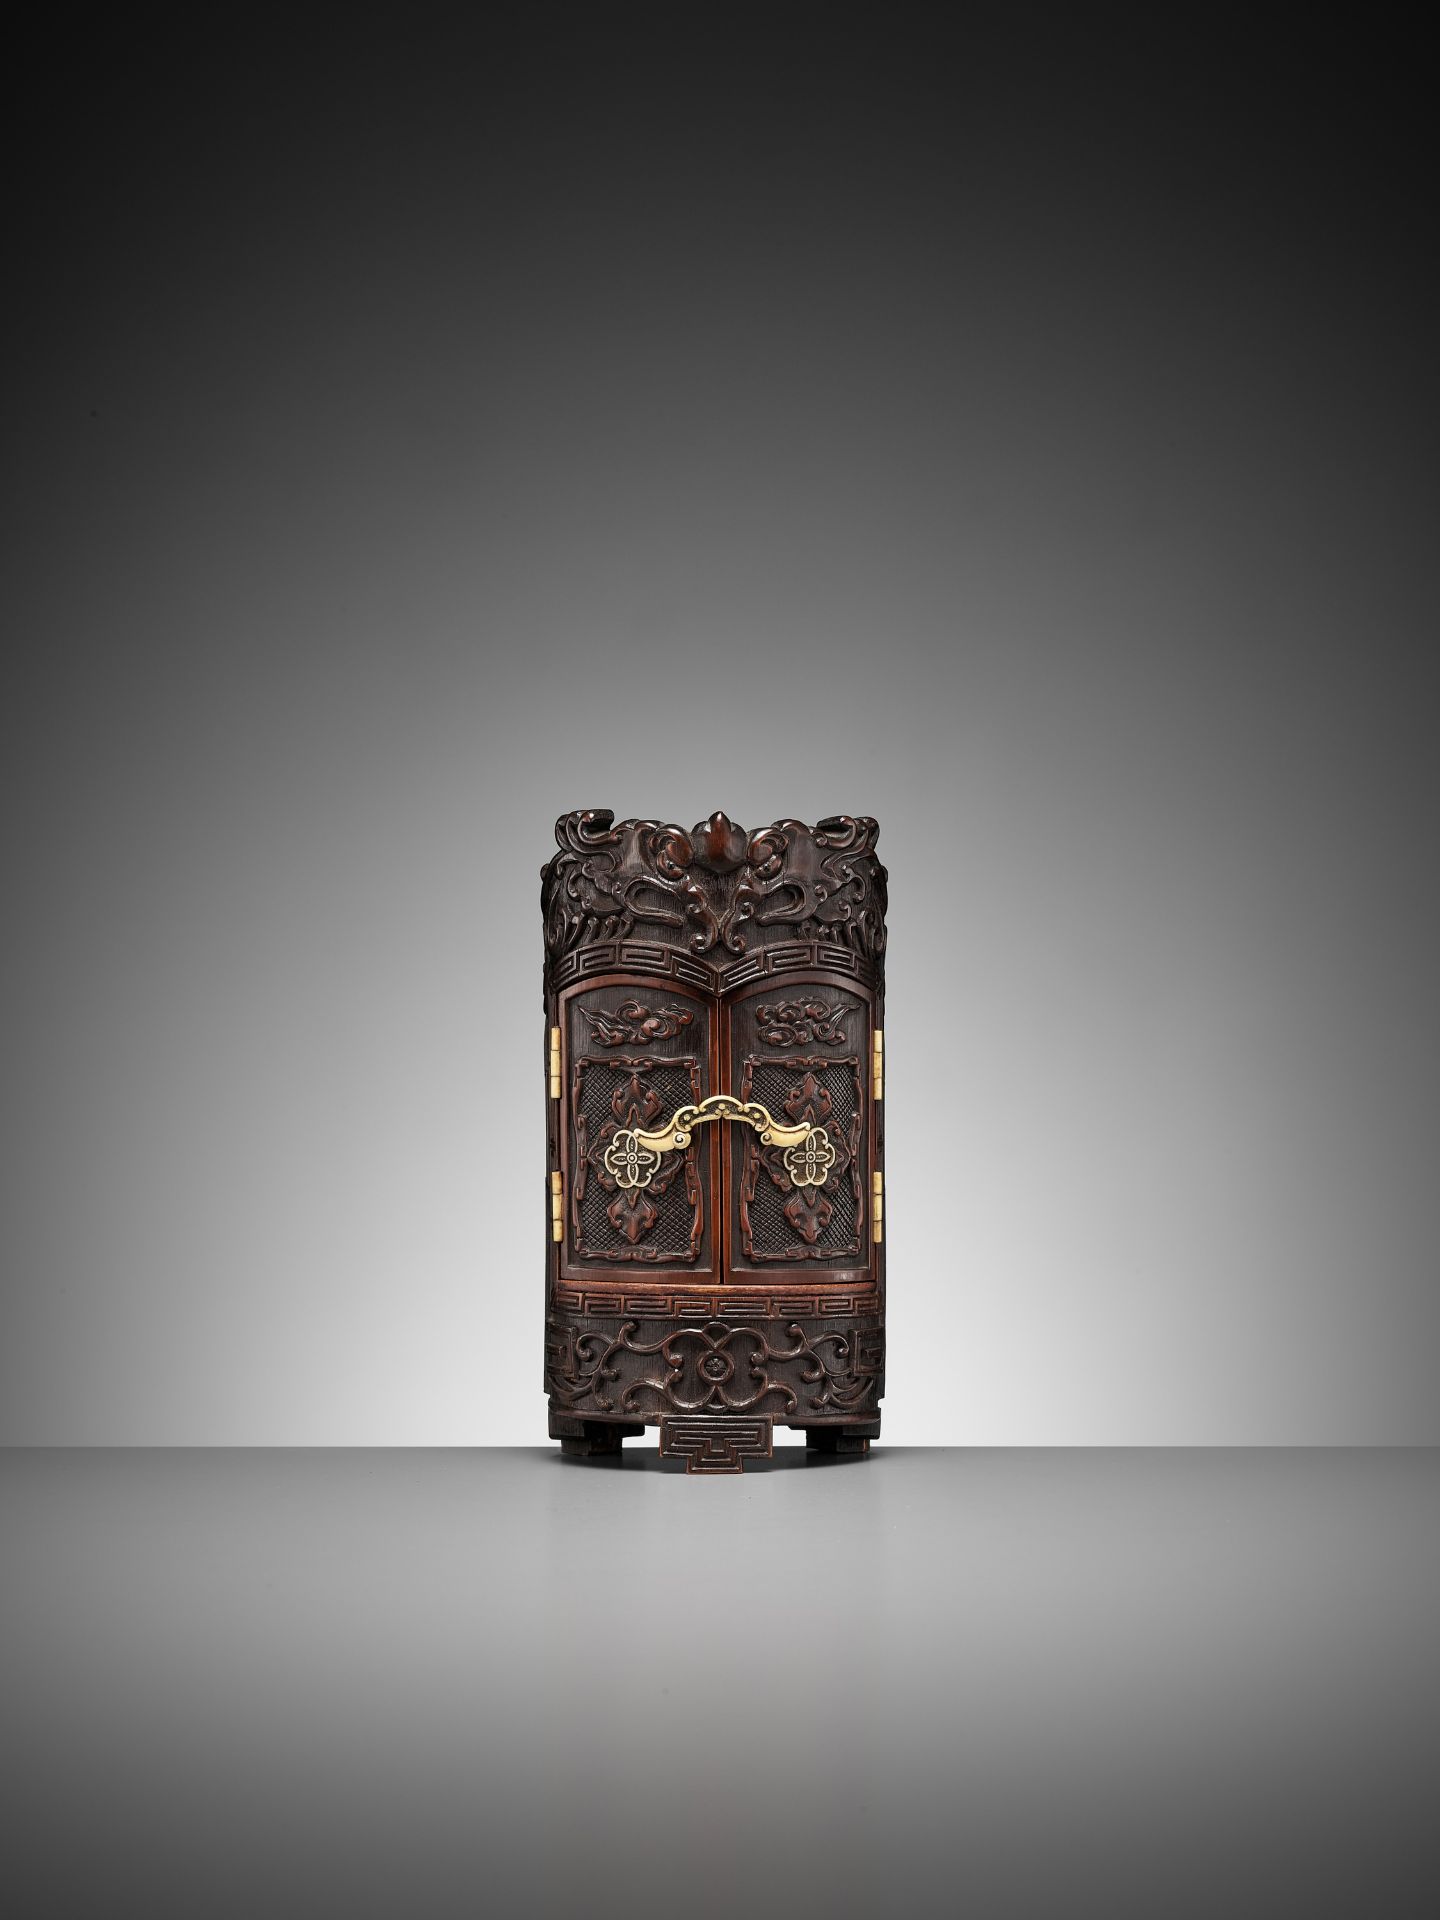 HOKKYO SESSAI: AN EXTREMELY RARE BAMBOO ZUSHI (PORTABLE SHRINE) WITH STAG ANTLER MOUNTS - Image 6 of 13